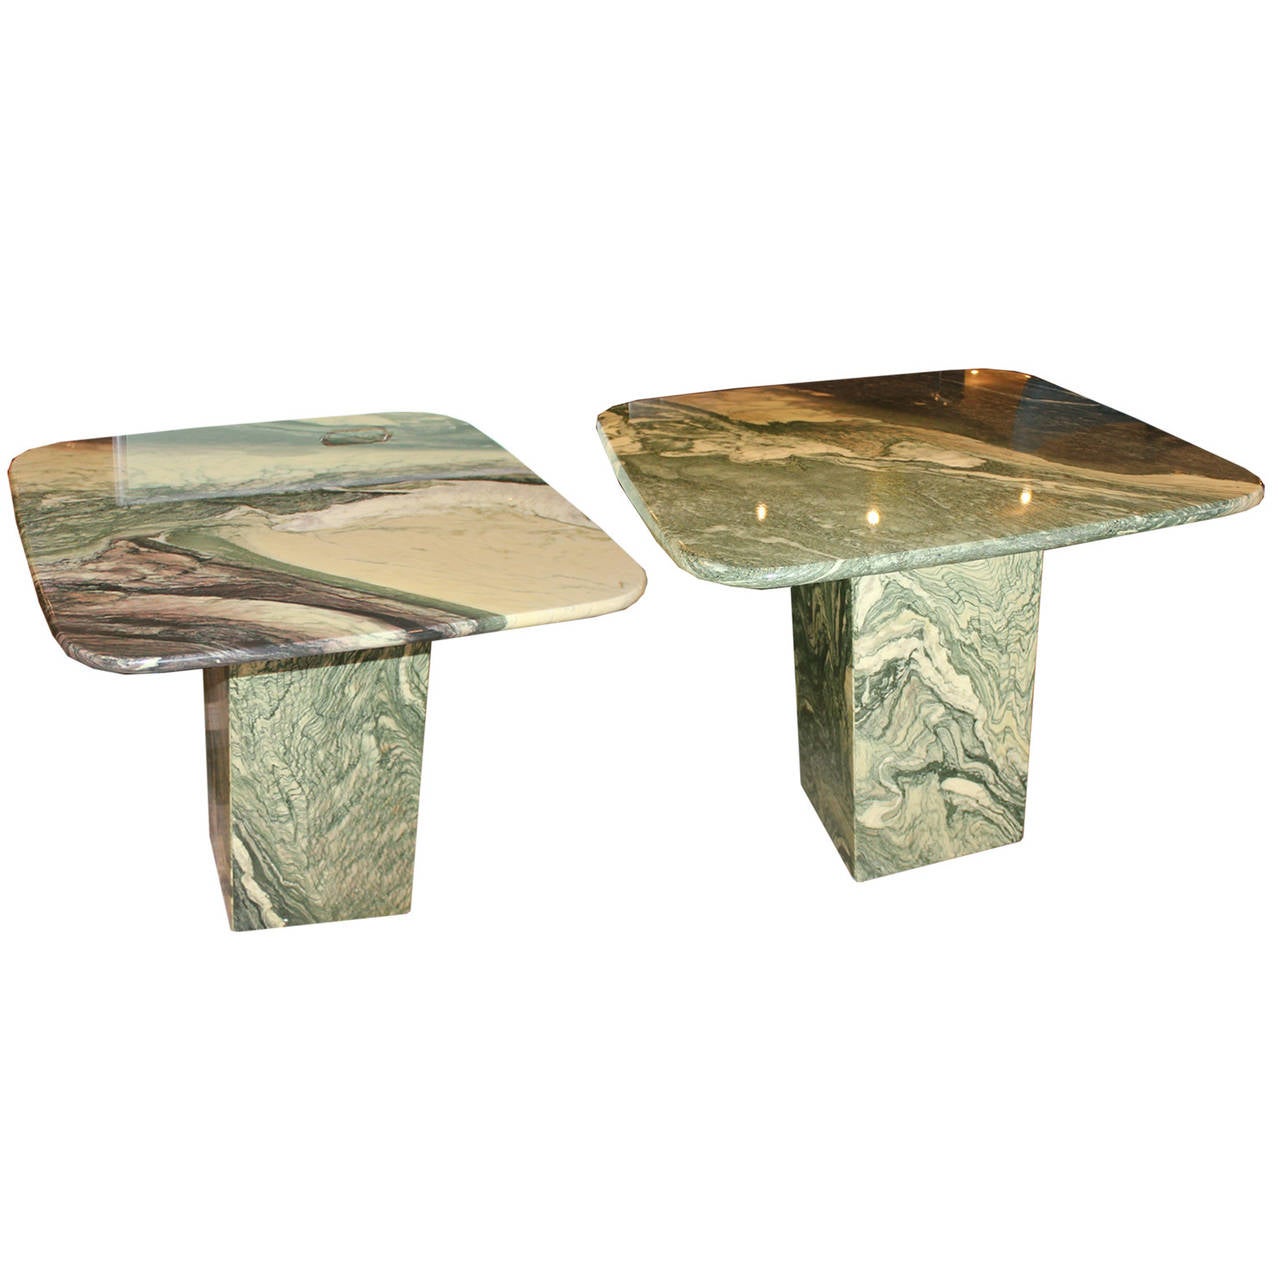 Beautiful marble table looks amazing from every angle. Slabs sit atop marble pedestal. Table on left available.